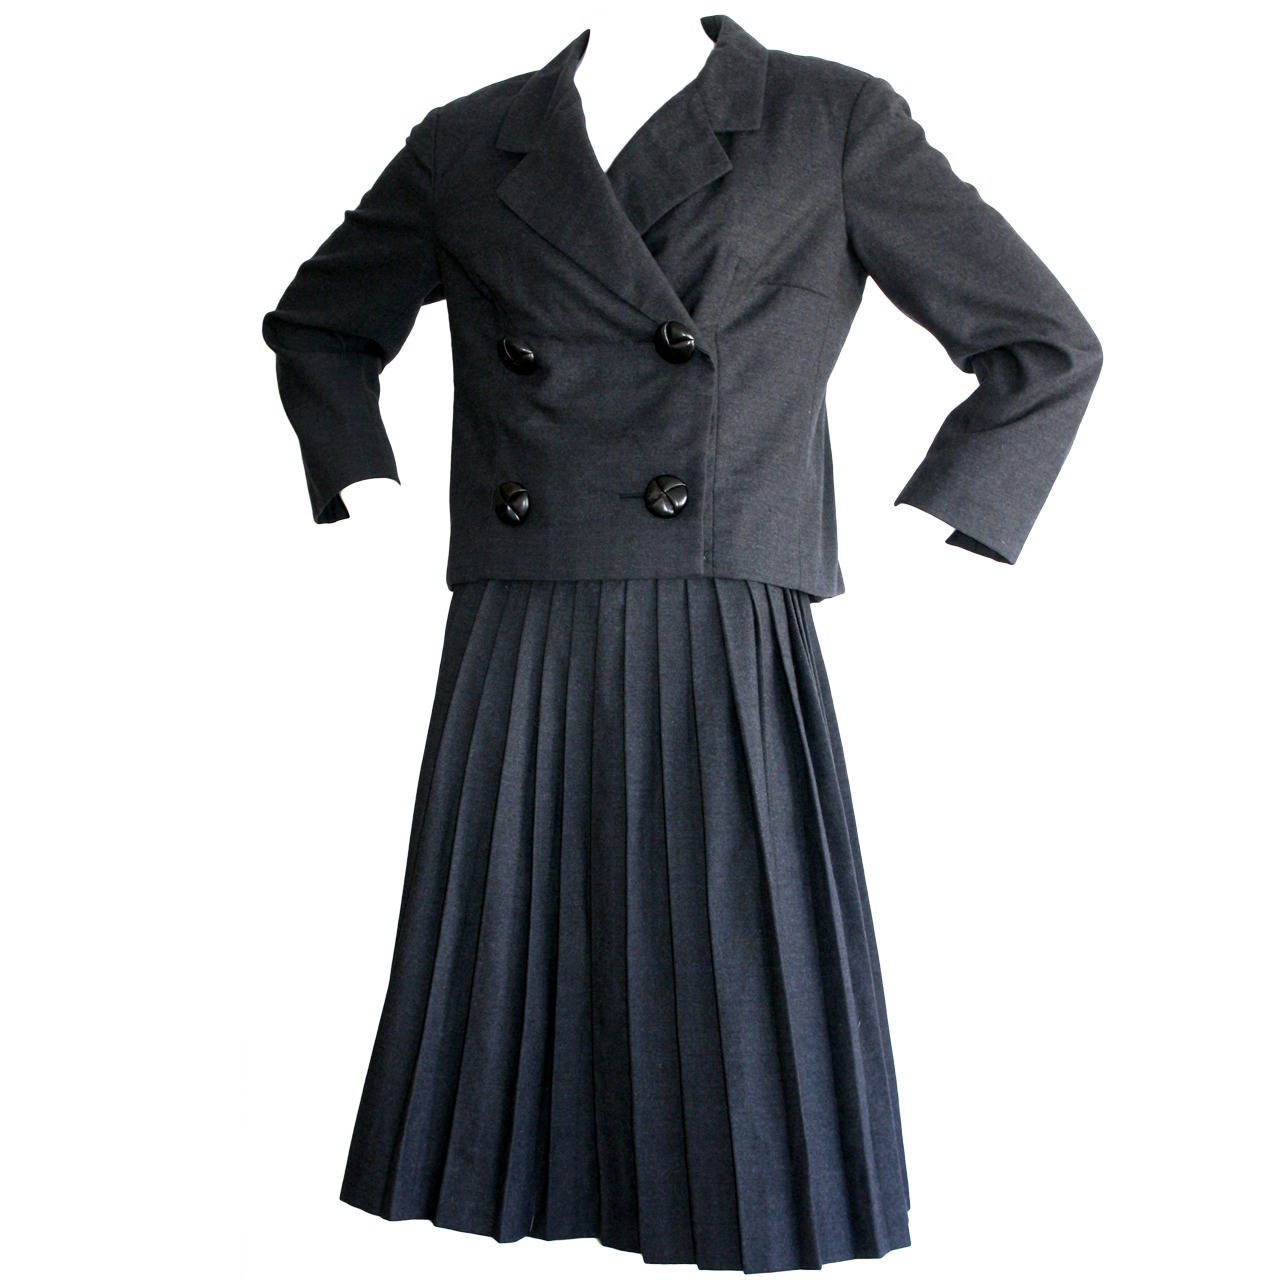 Iconic 1960s Vintage Christian Dior Skirt Suit Pill Box Charcoal Grey